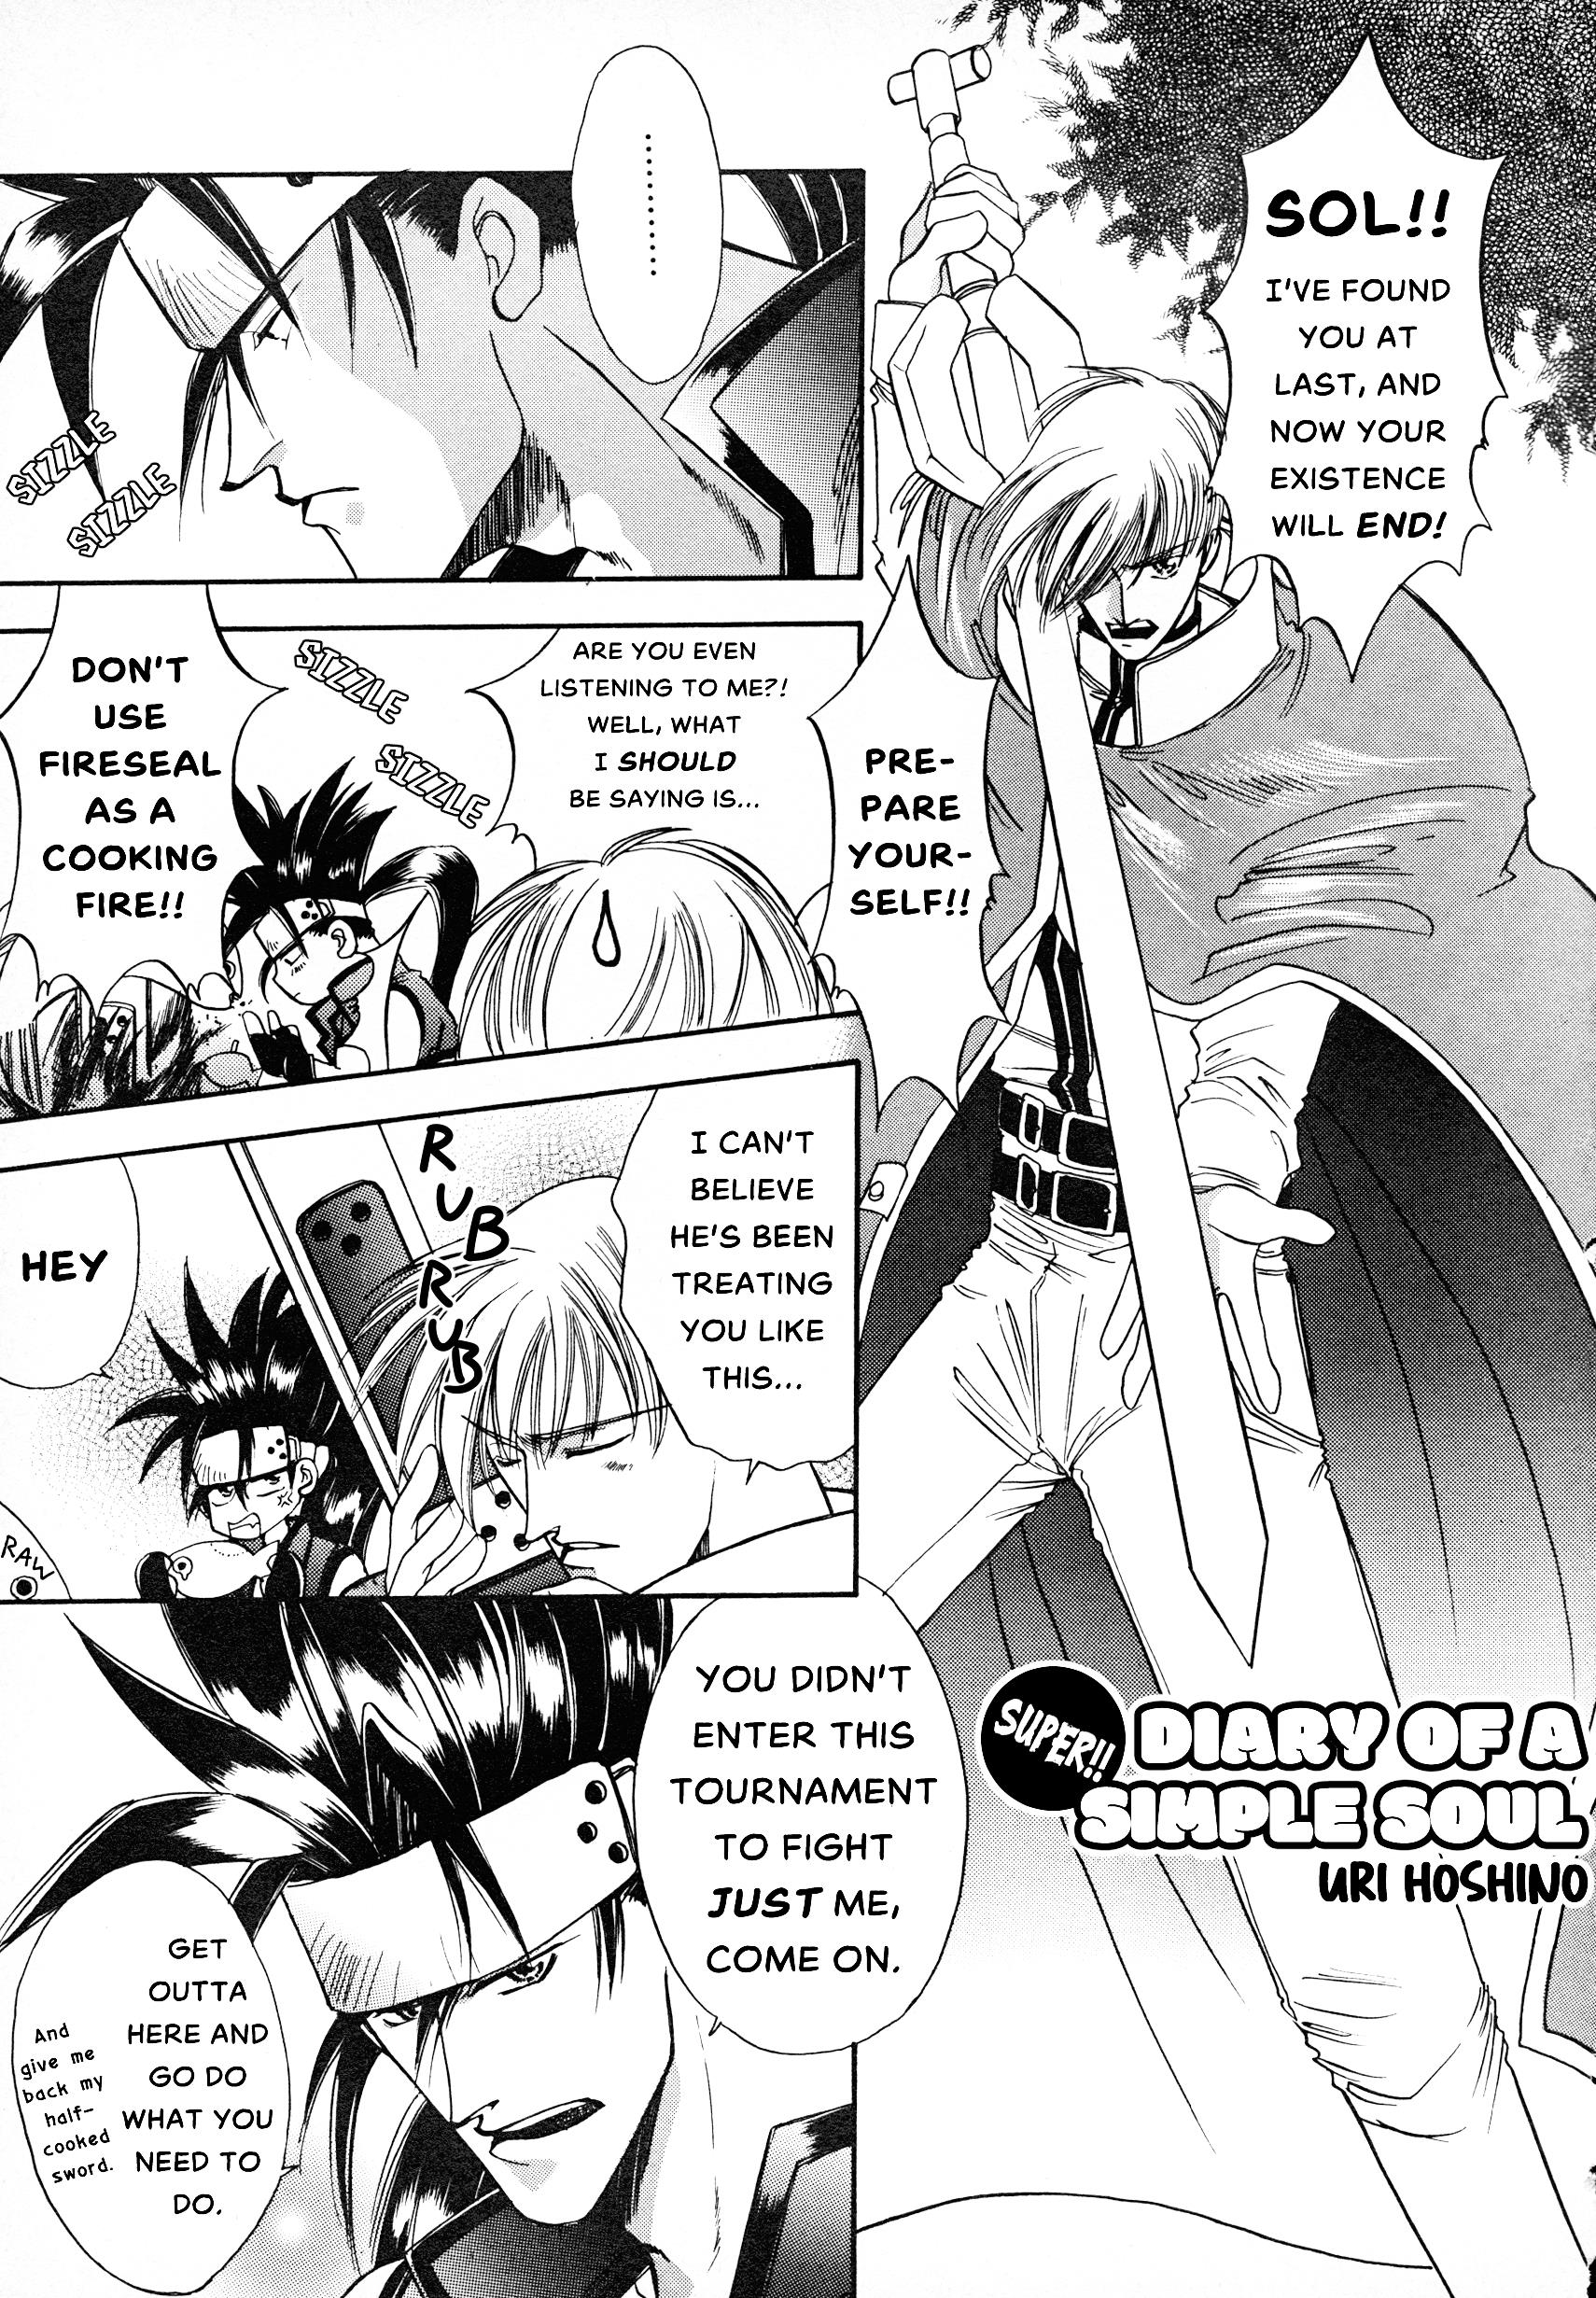 Guilty Gear Comic Anthology Vol.1 Chapter 8: Diary Of A Super!! Simple Soul - Picture 1